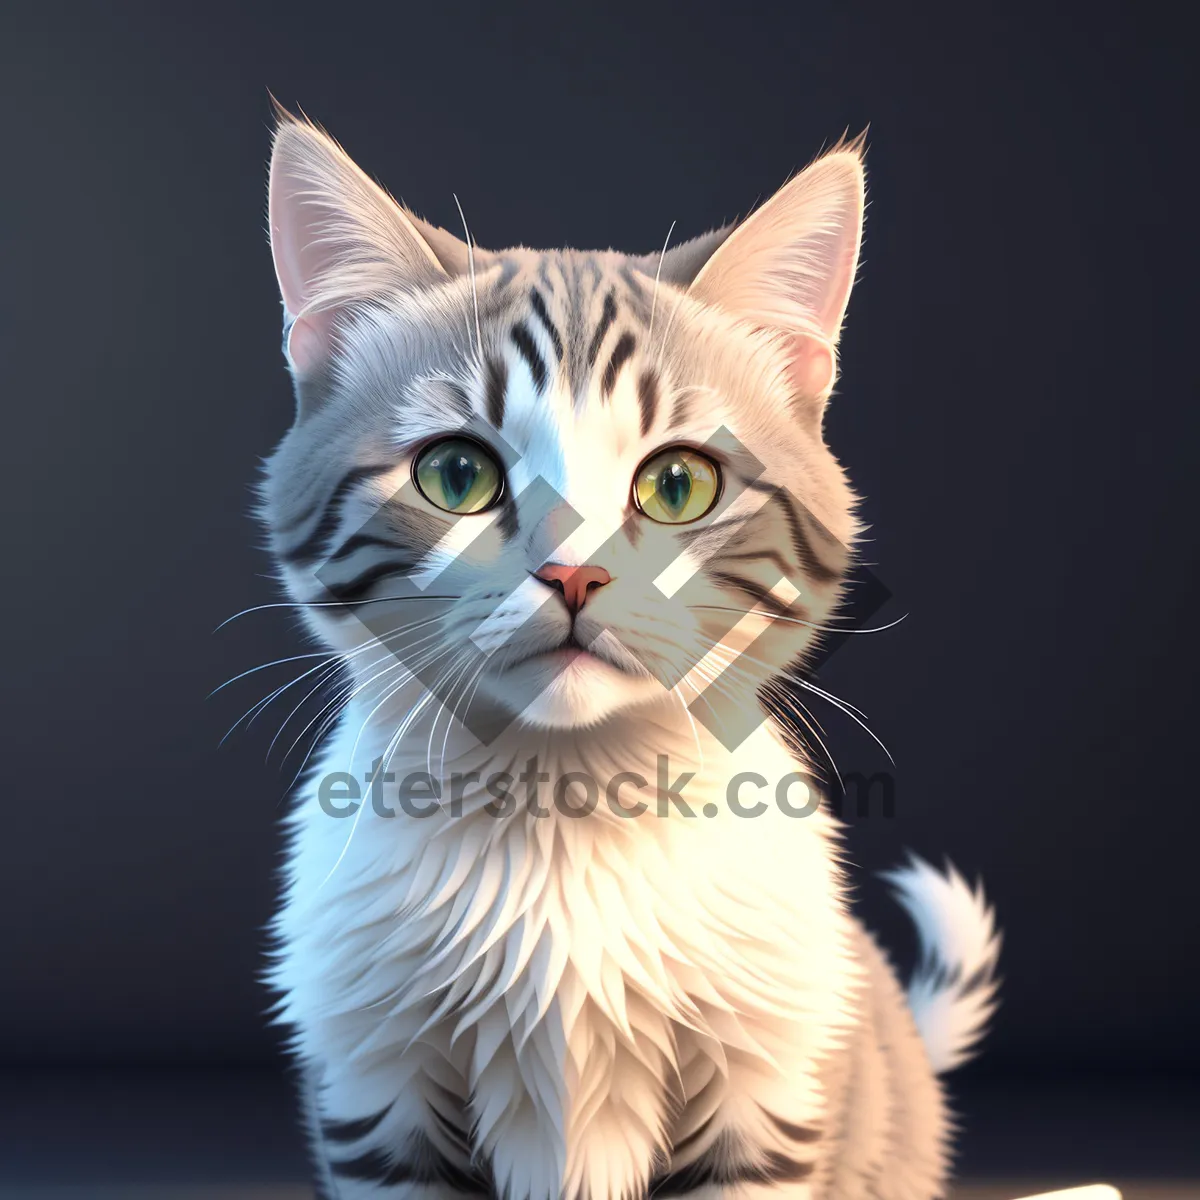 Picture of Fluffy Gray Kitten with Playful Whiskers